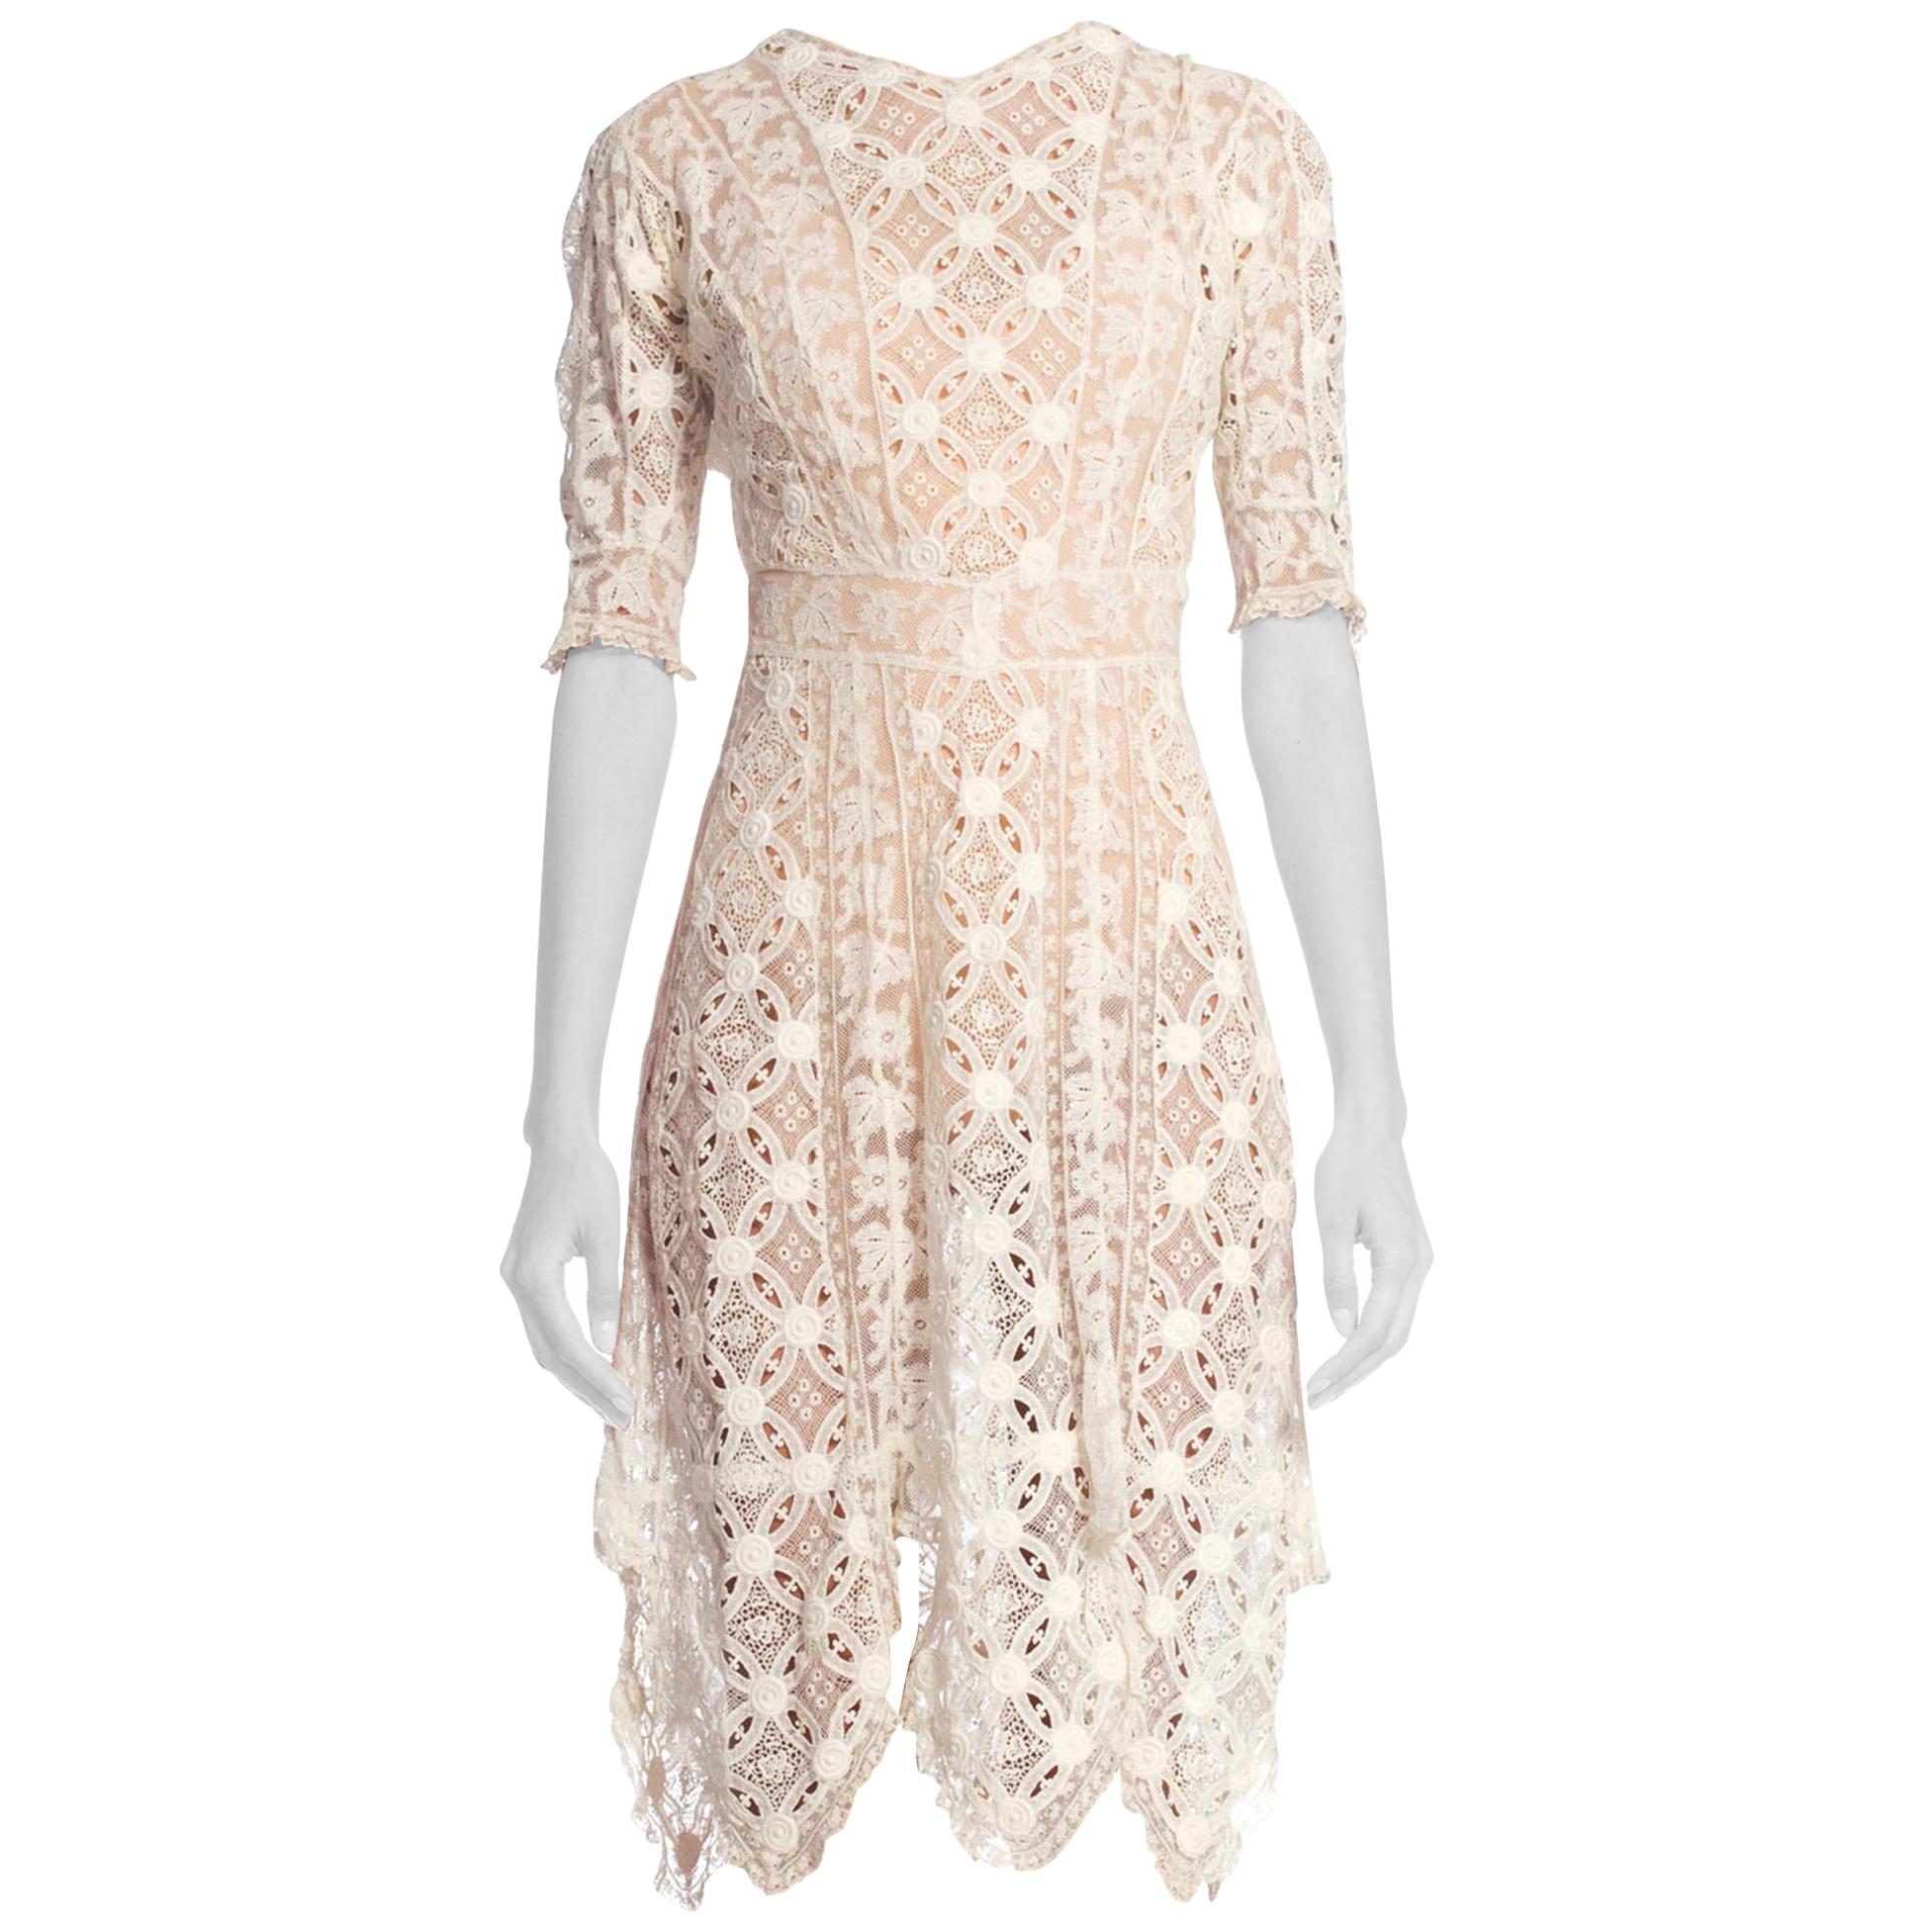 Edwardian White Organic Cotton Dress Artfully Pieced In Numerous Styles Of Lace For Sale